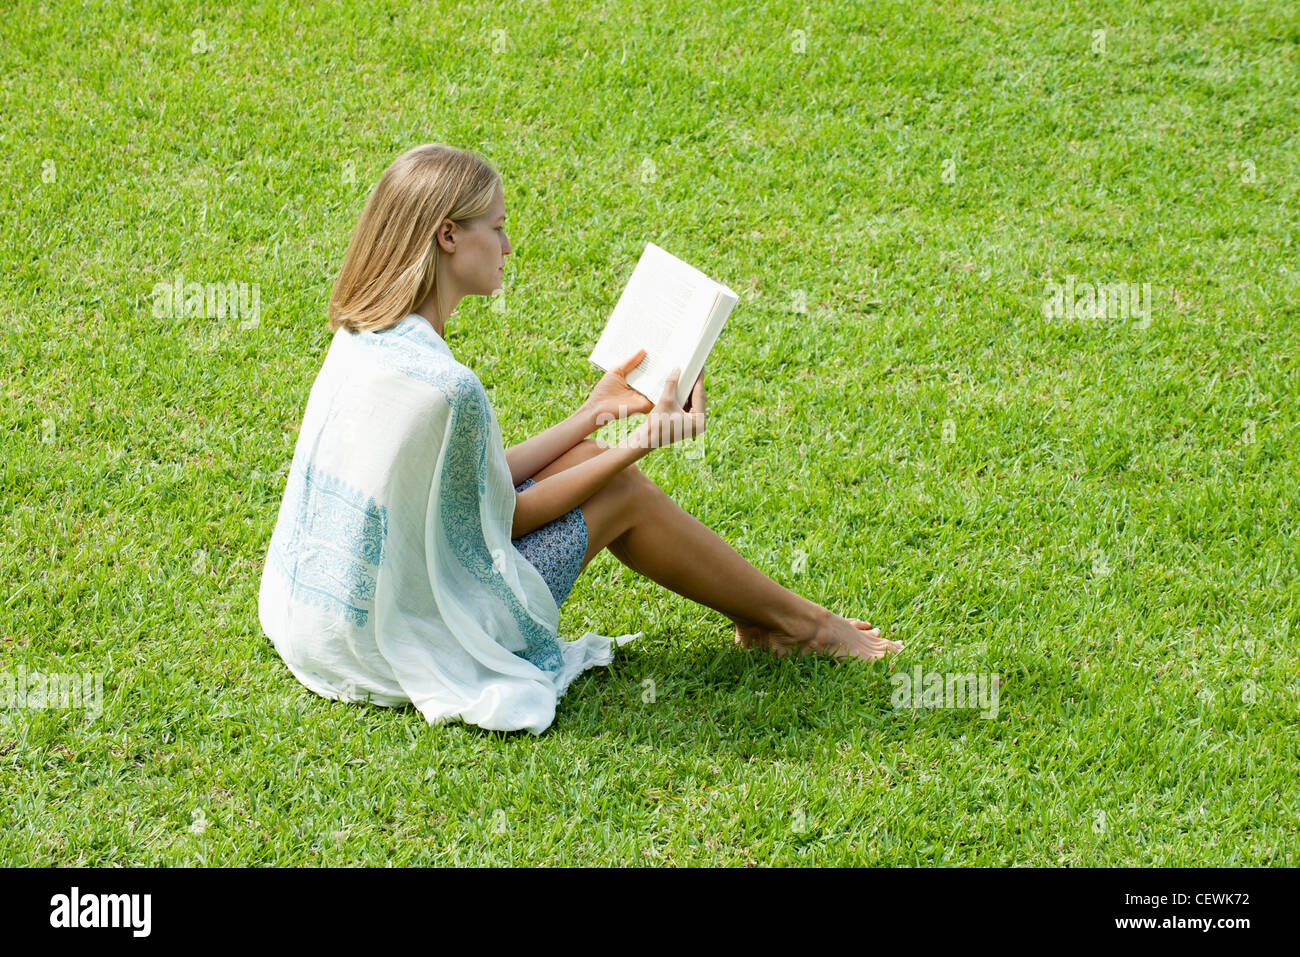 Young woman sitting on grass reading book Stock Photo